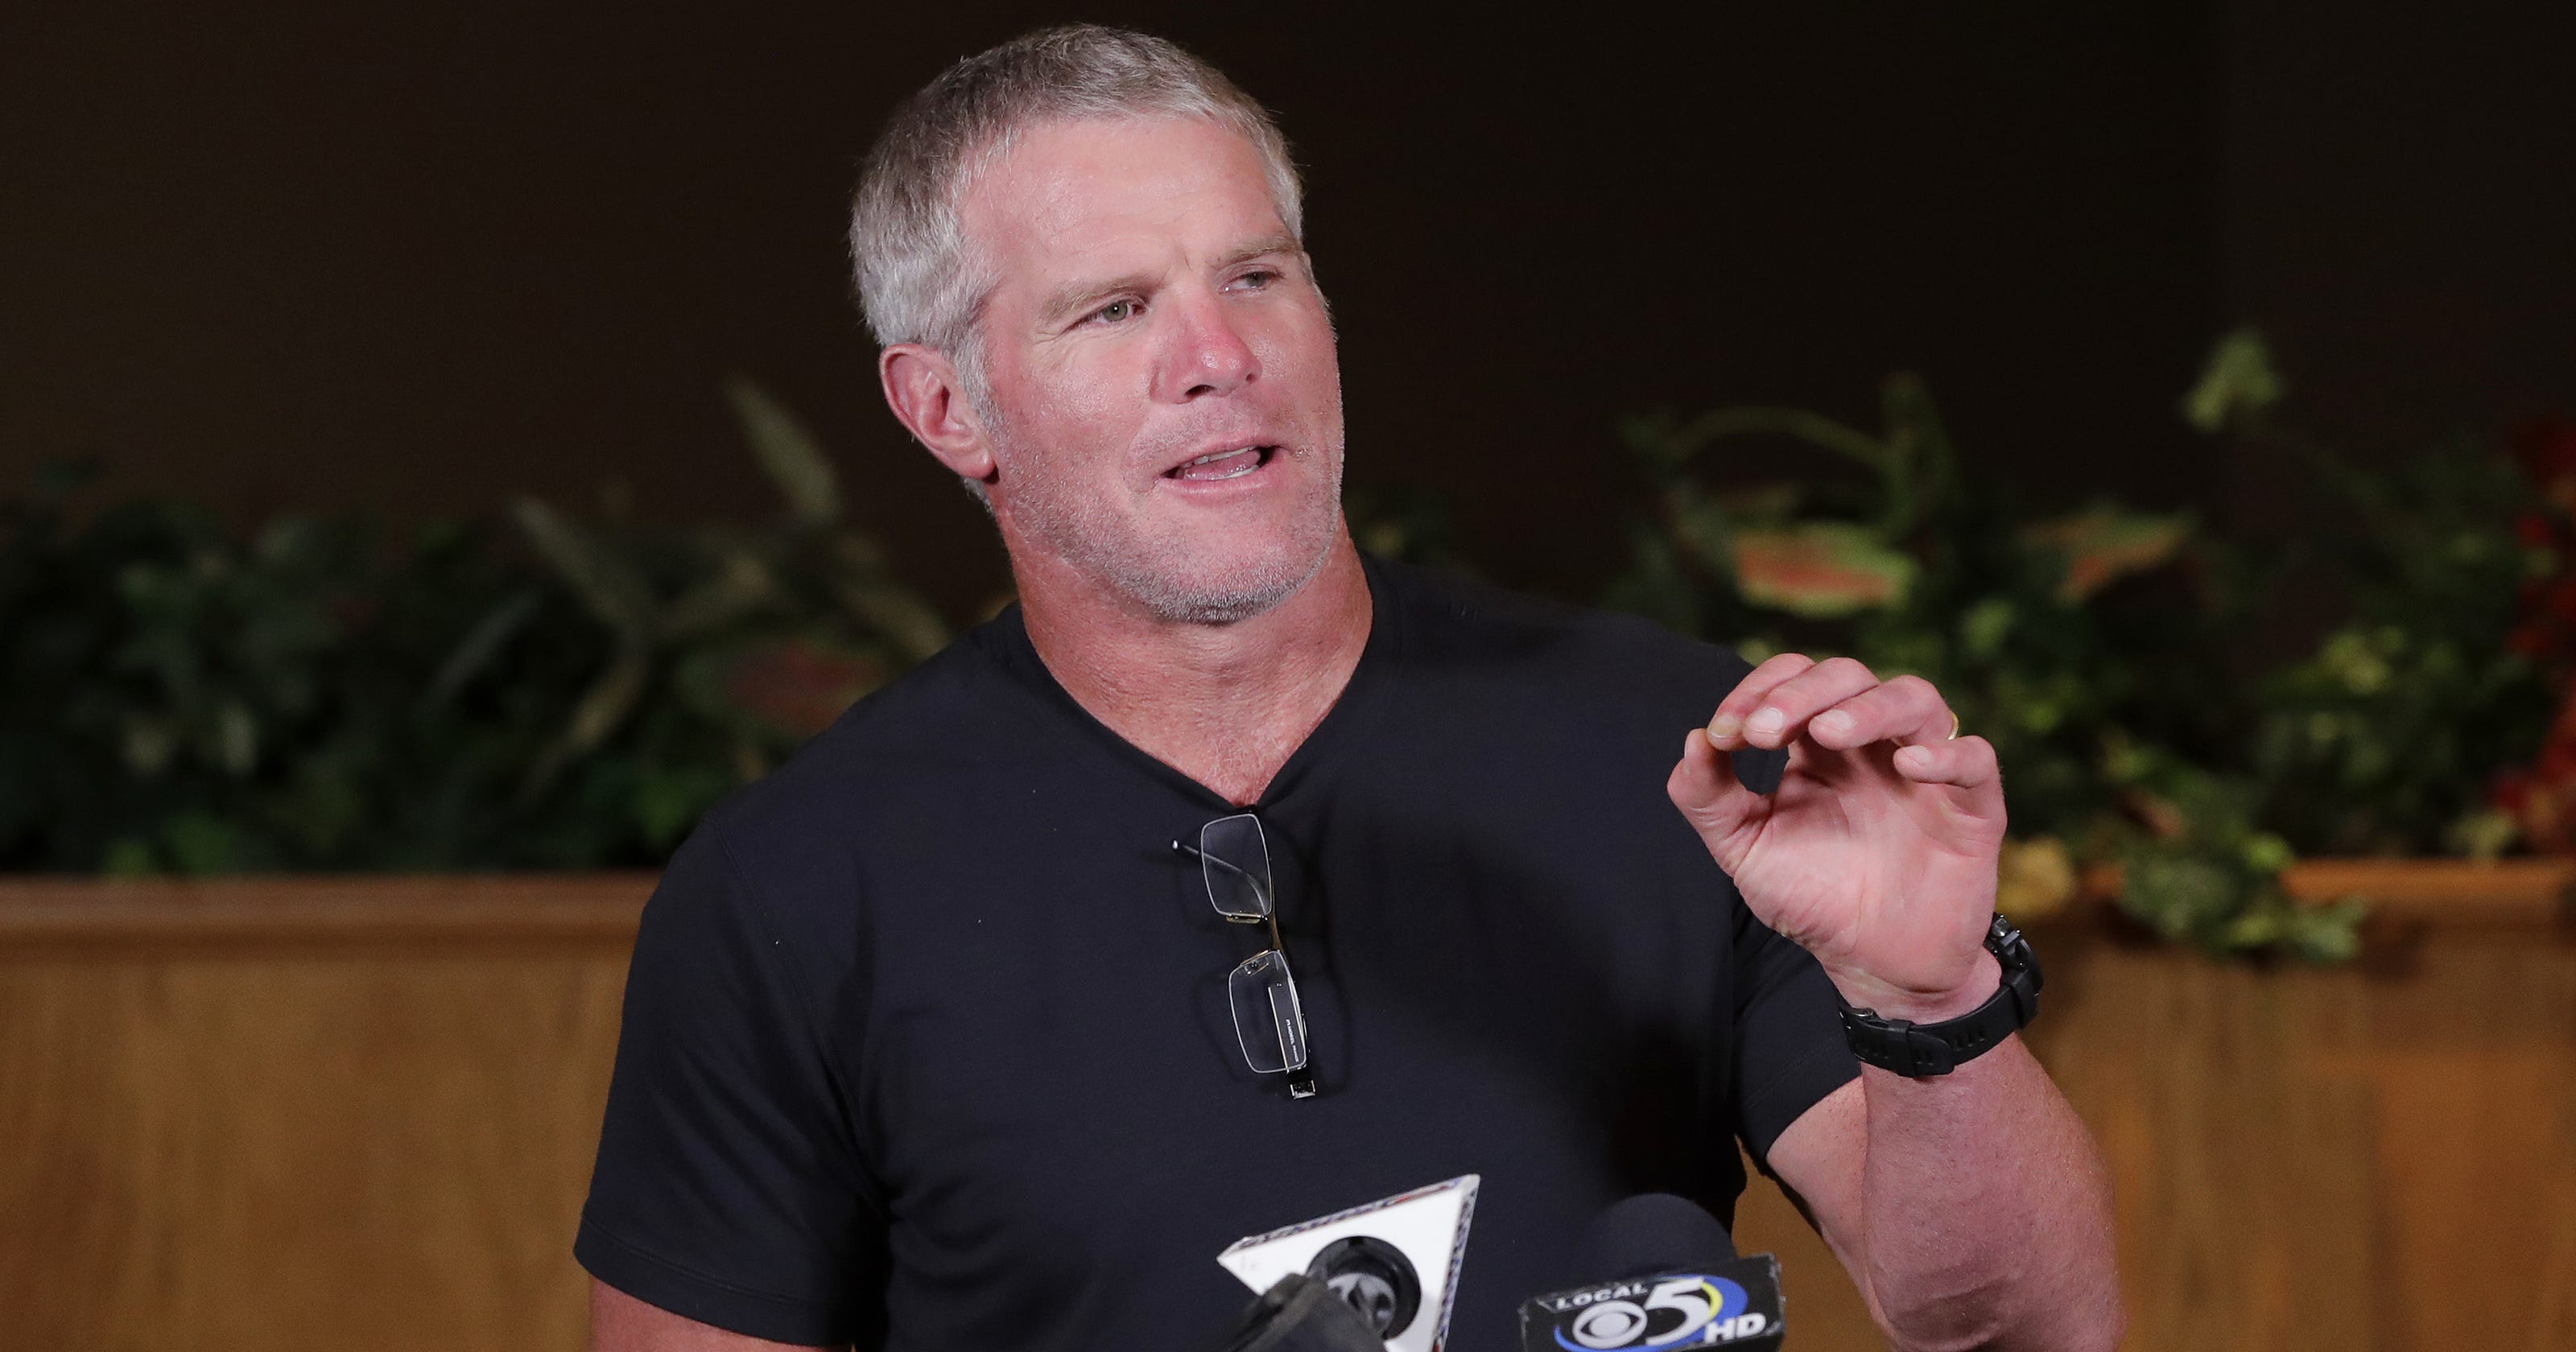 Brett Favre on concussions: 'There's a lot of fear'